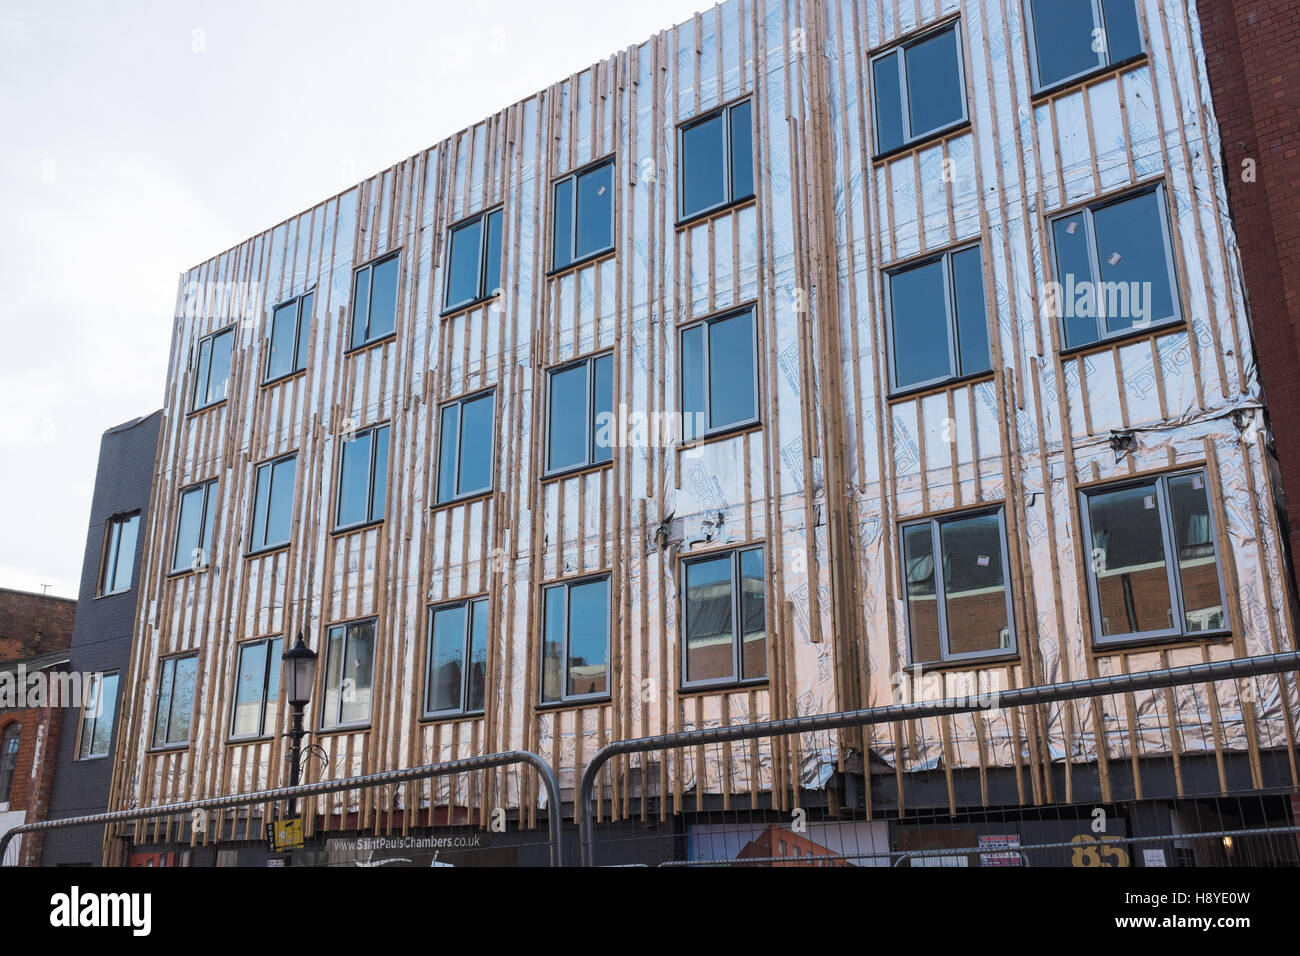 A new building with the insulation panels visible before cladding is fixed Stock Photo